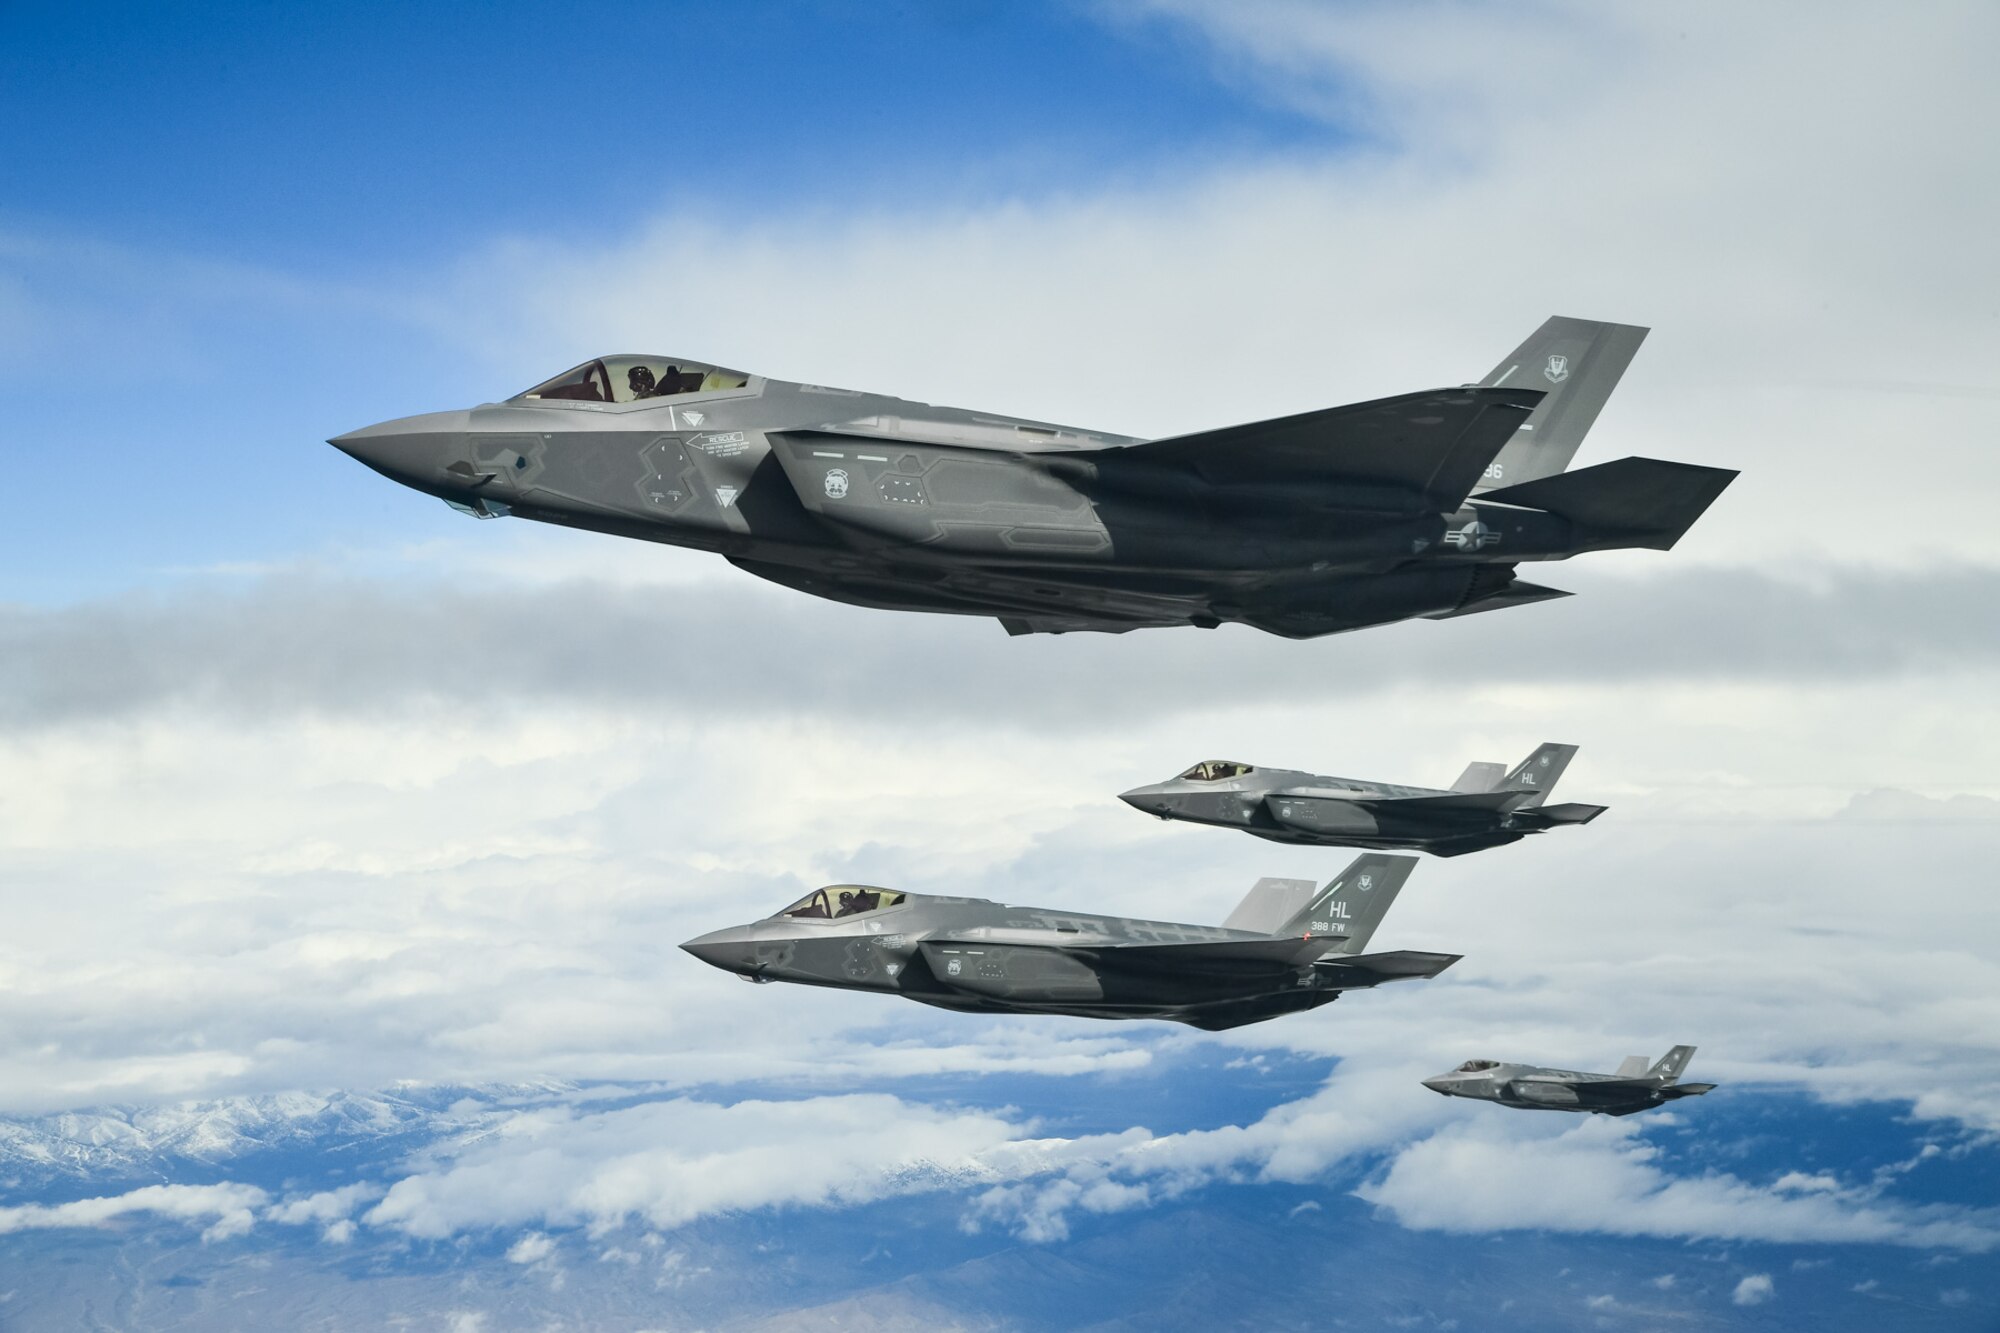 Four F-35 Lightning IIs fly in formation